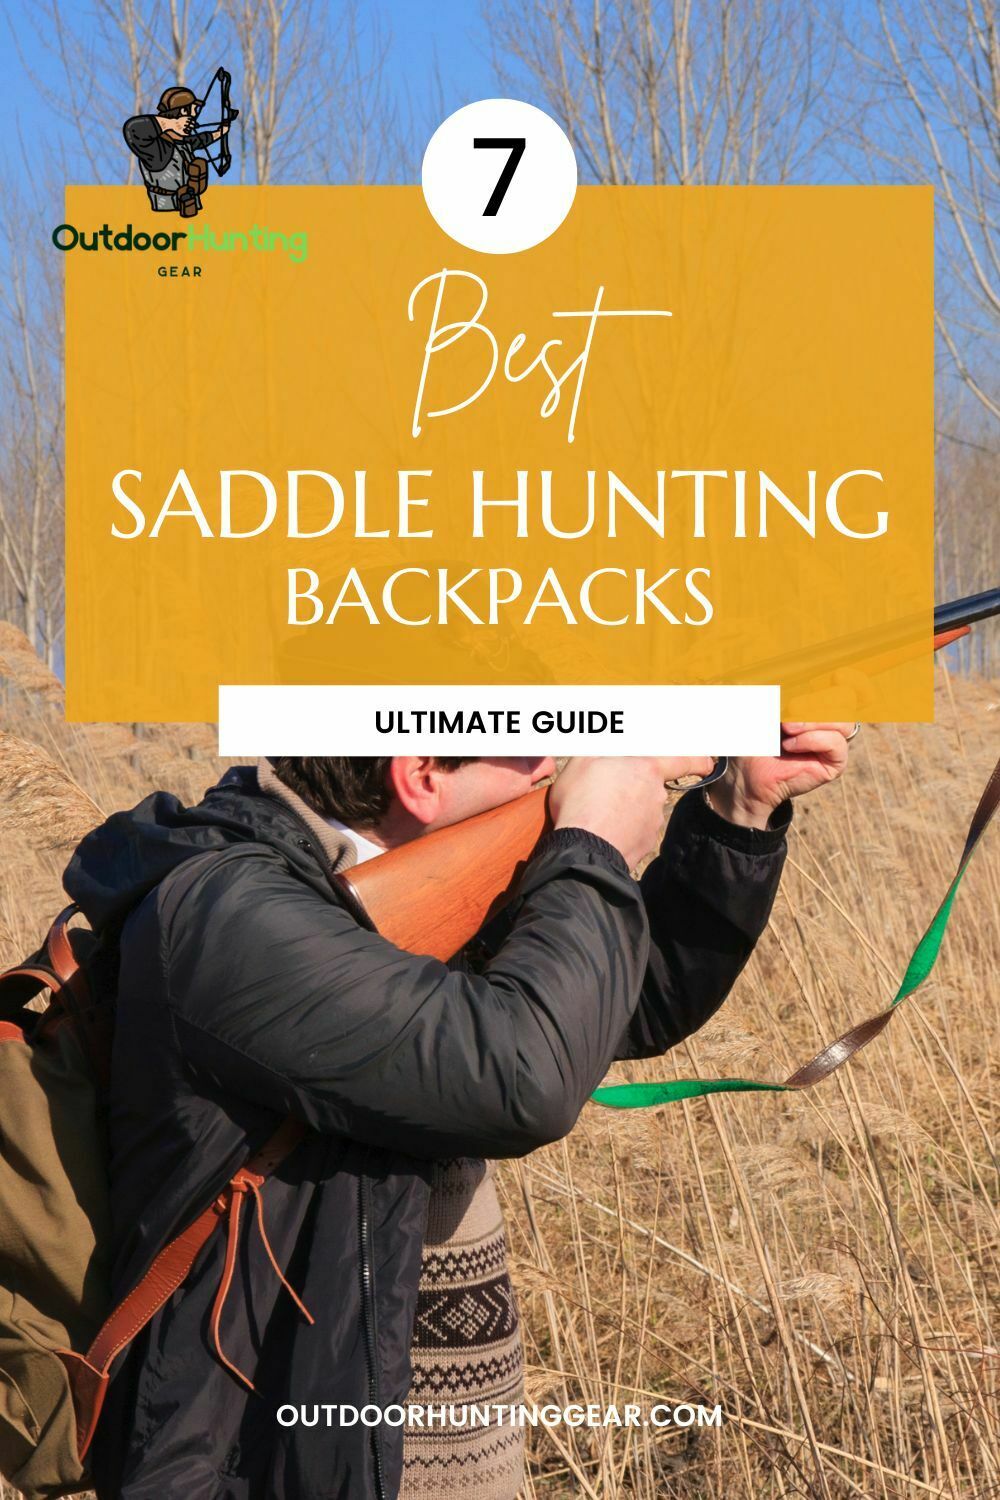 The seven best saddle hunting backpacks available.